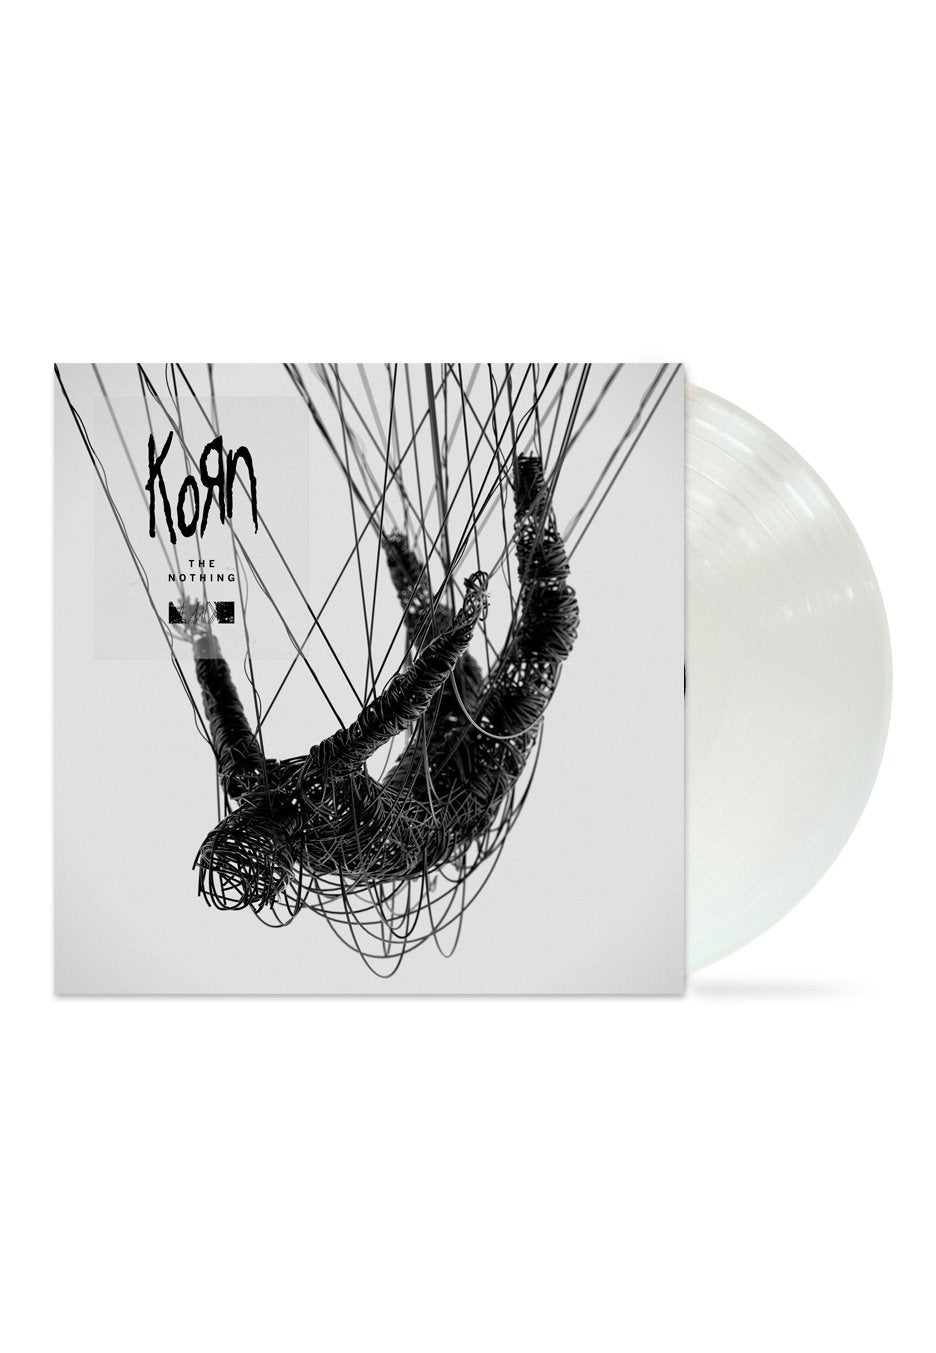 Korn - The Nothing White - Colored Vinyl